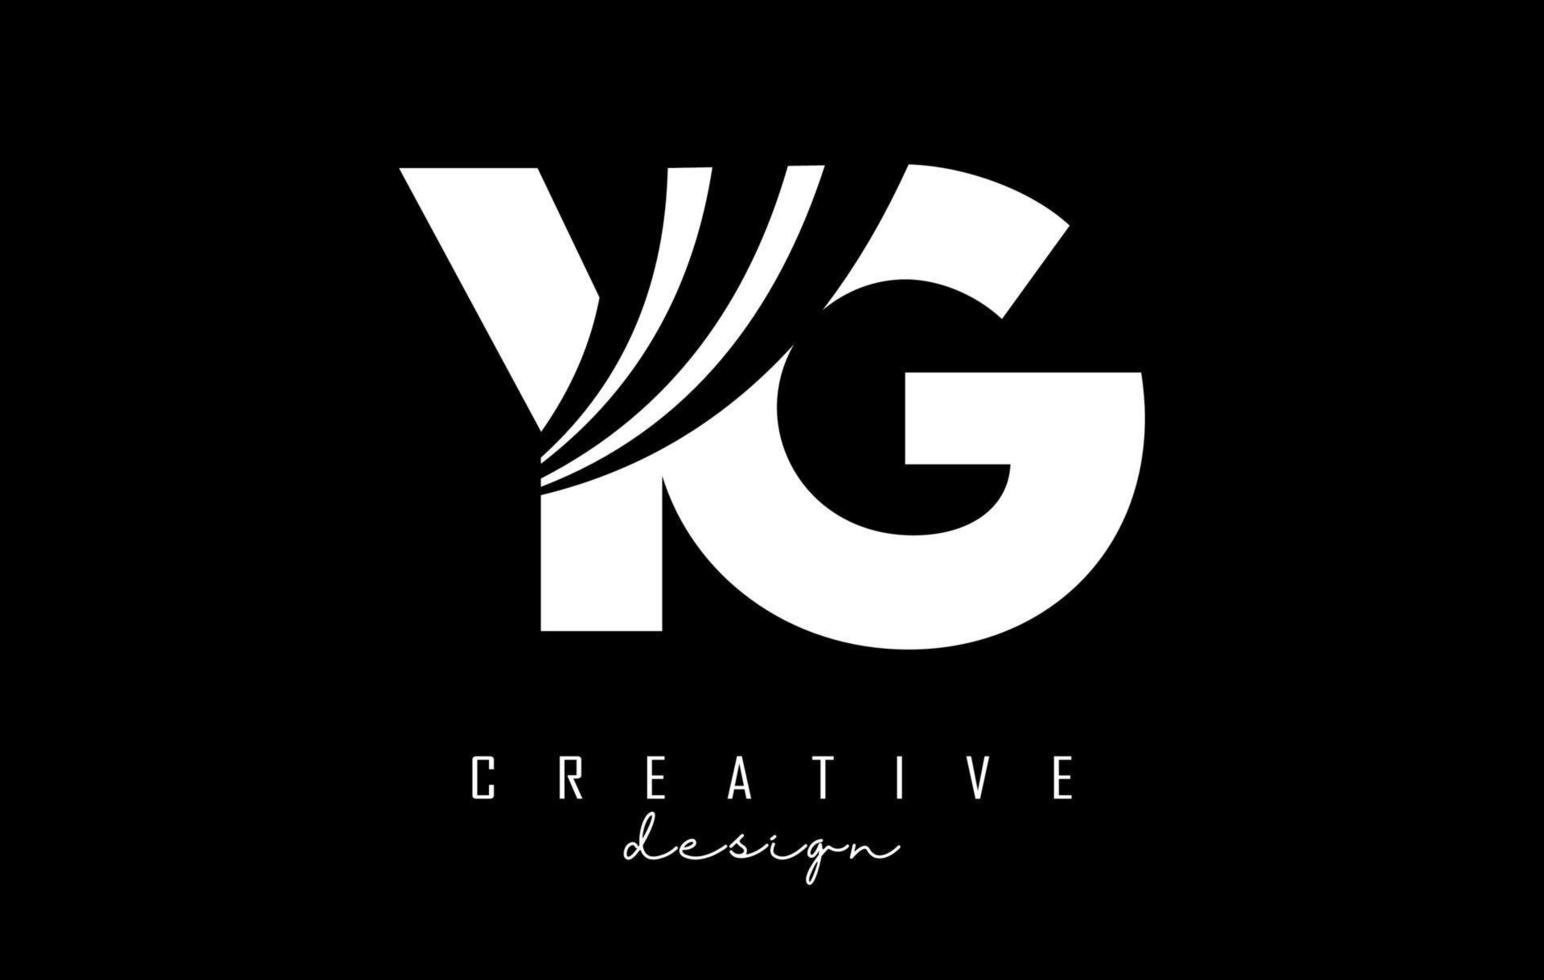 Creative white letters YG y g logo with leading lines and road concept design. Letters with geometric design. vector